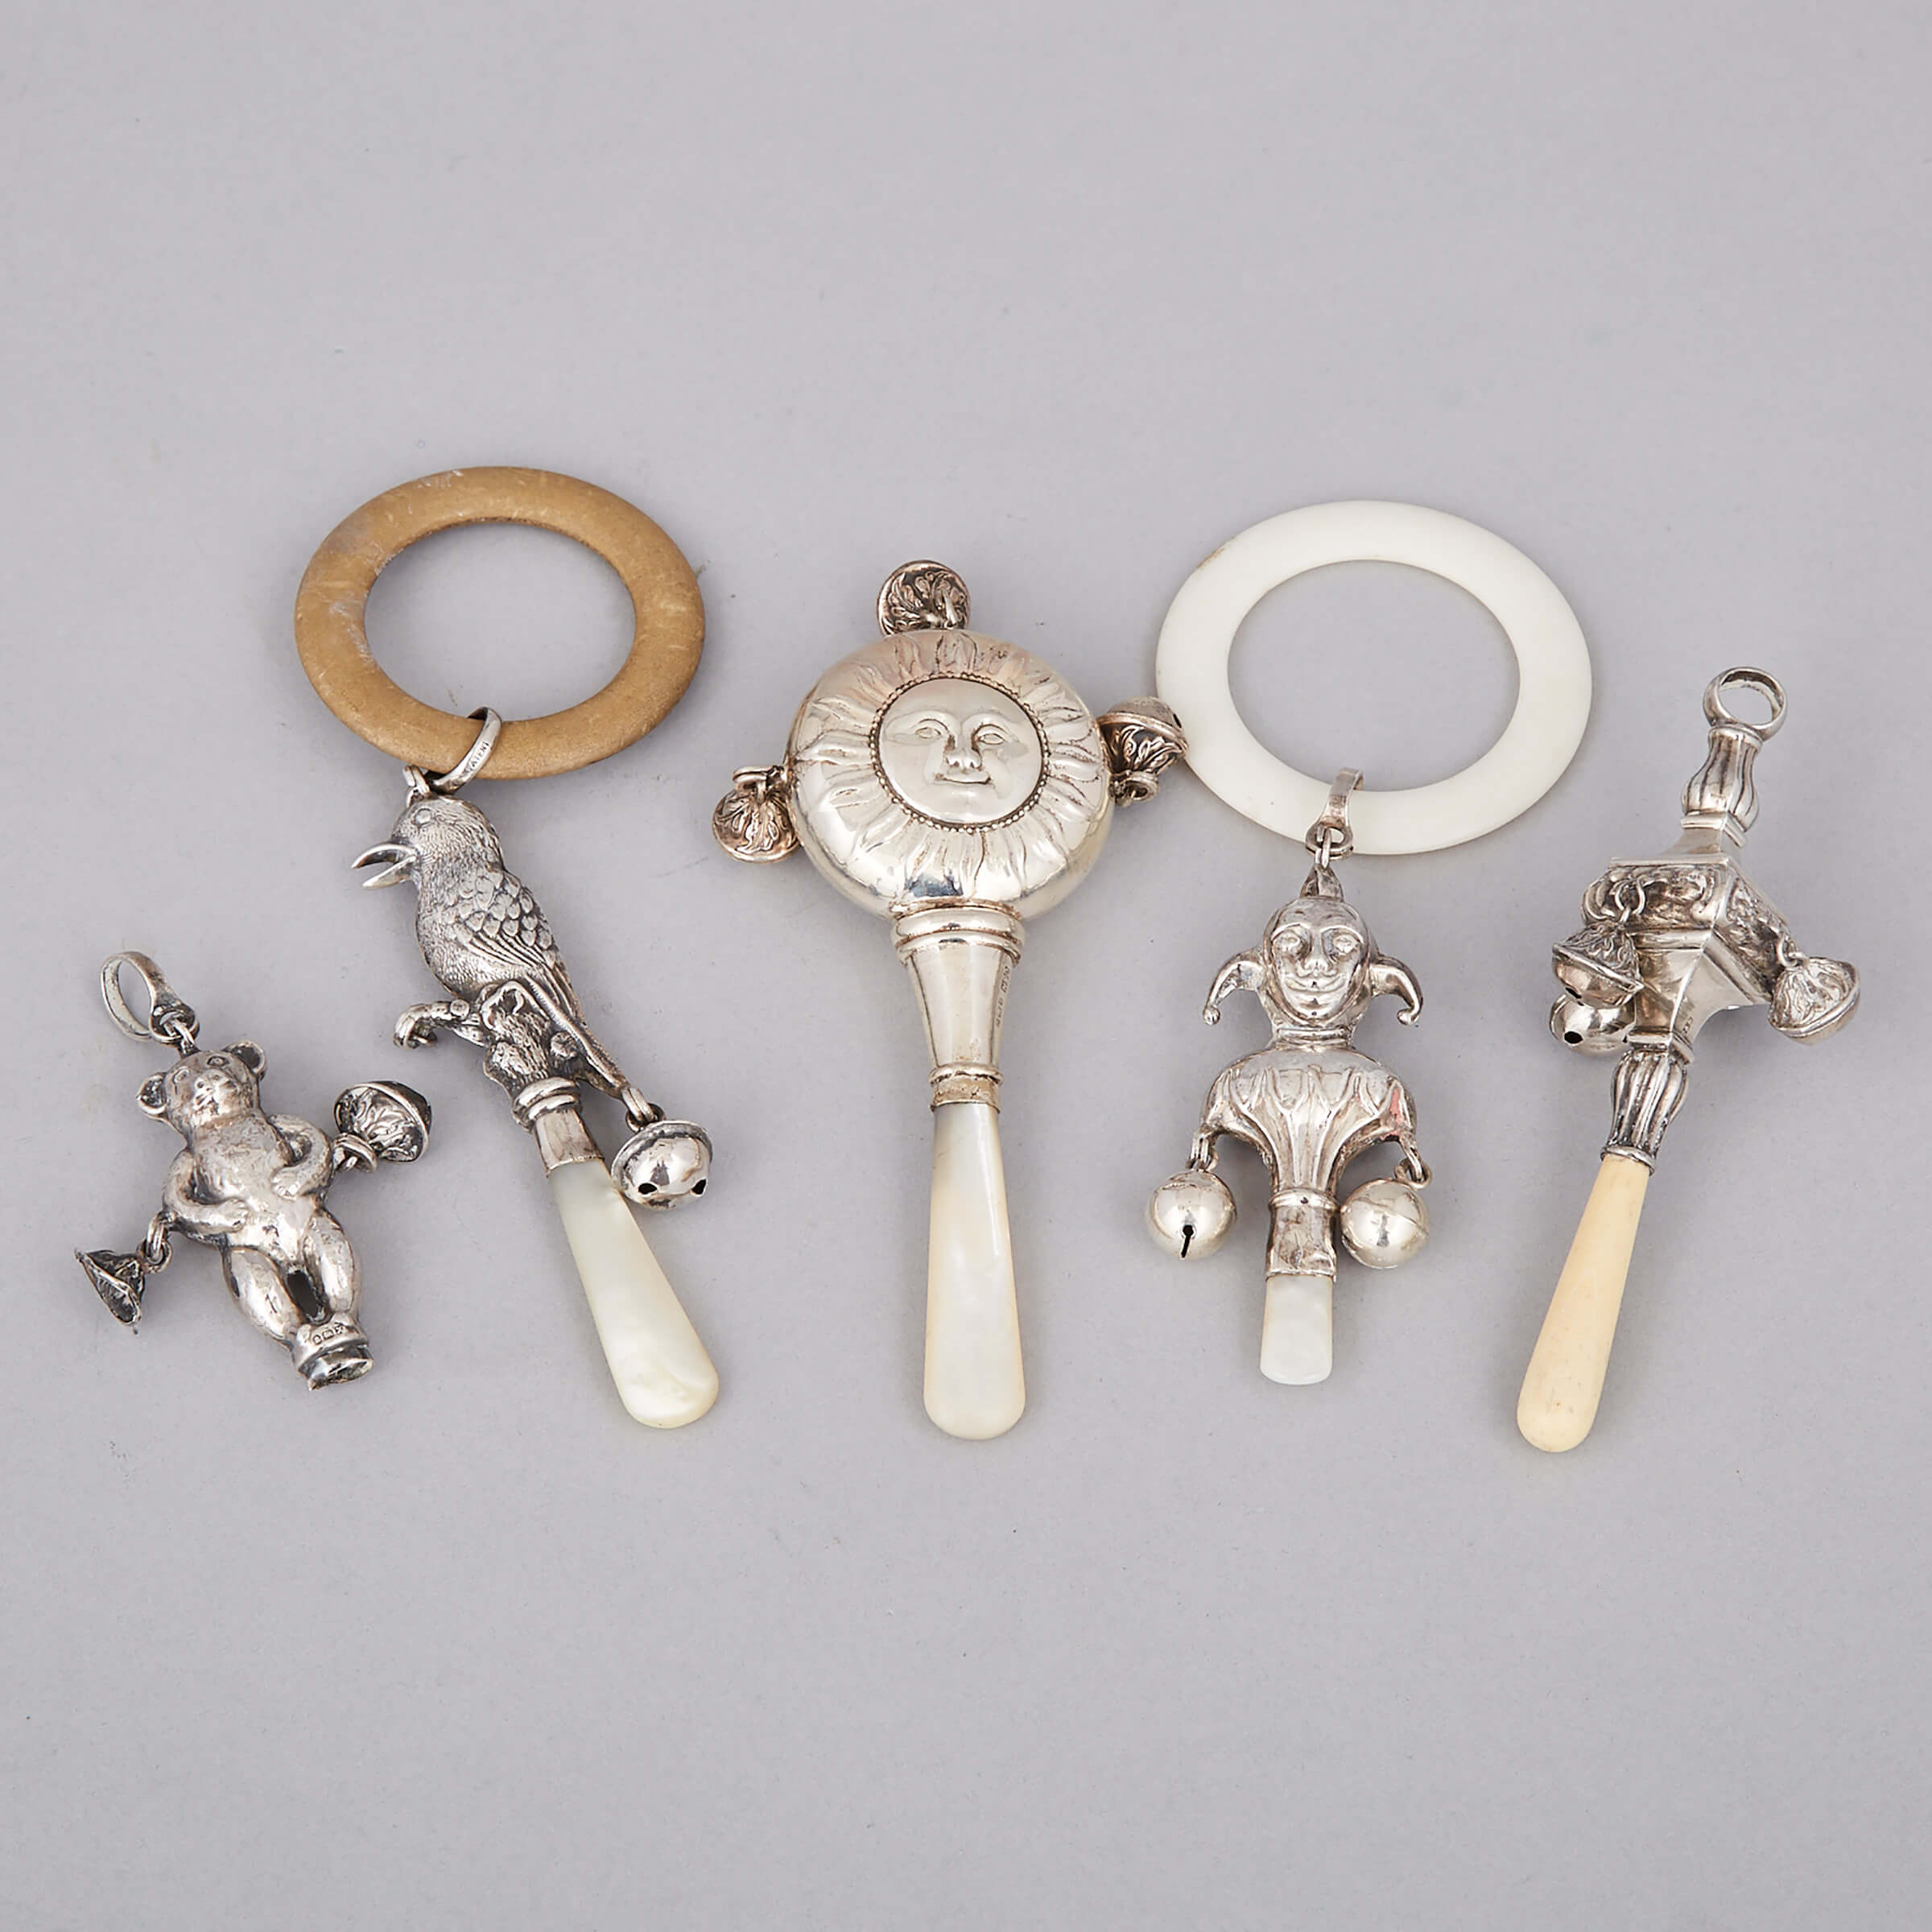 Five English Silver Child’s Rattles and Whistles,Crisford & Norris, Birmingham, 20th century